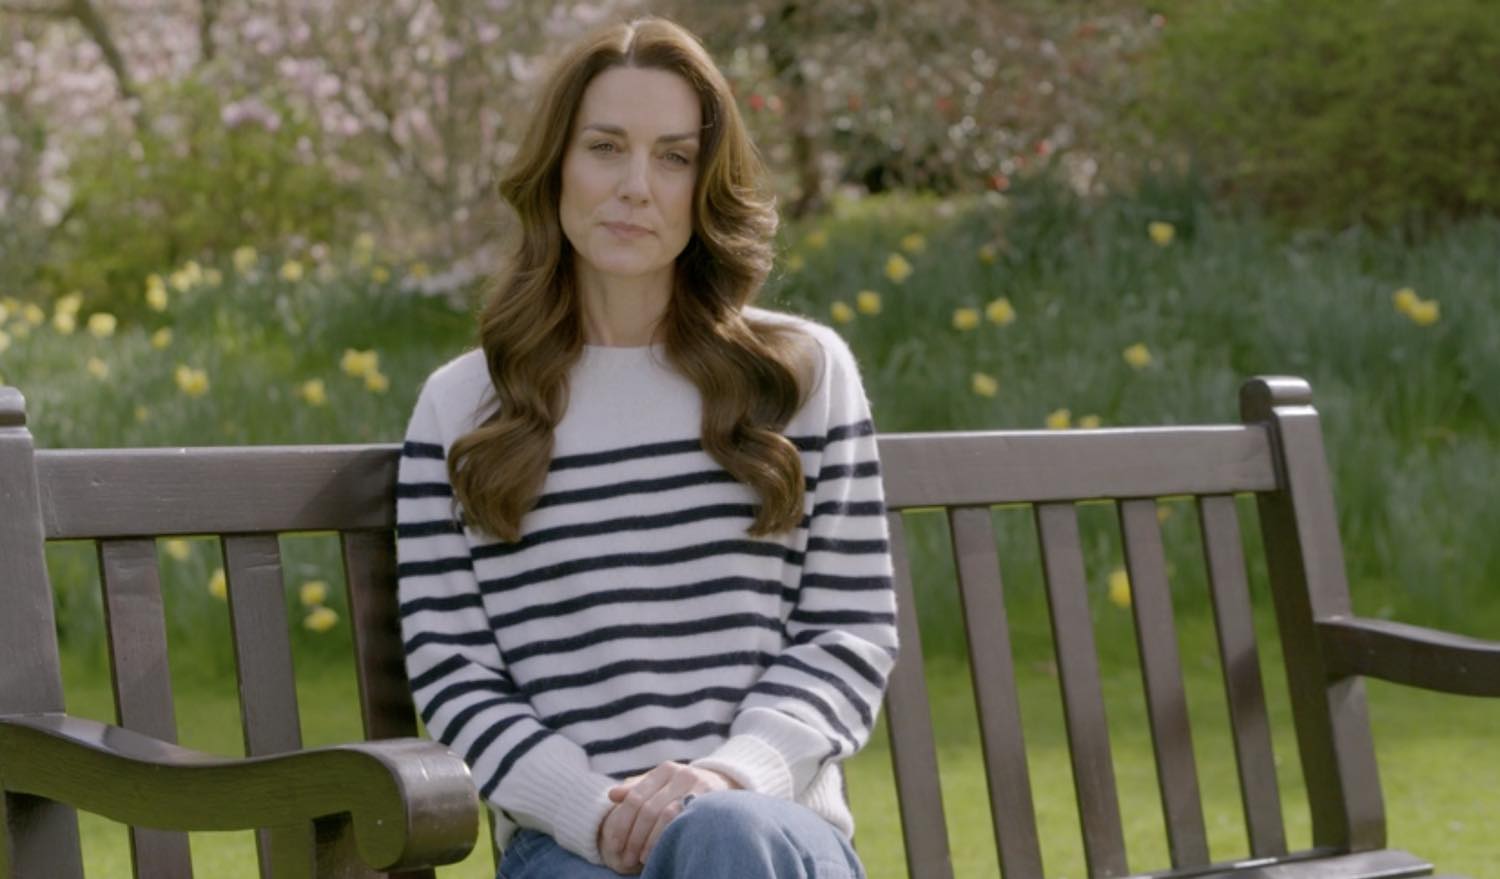 Kate Middleton reveals two months after the operation: “I have cancer” – video